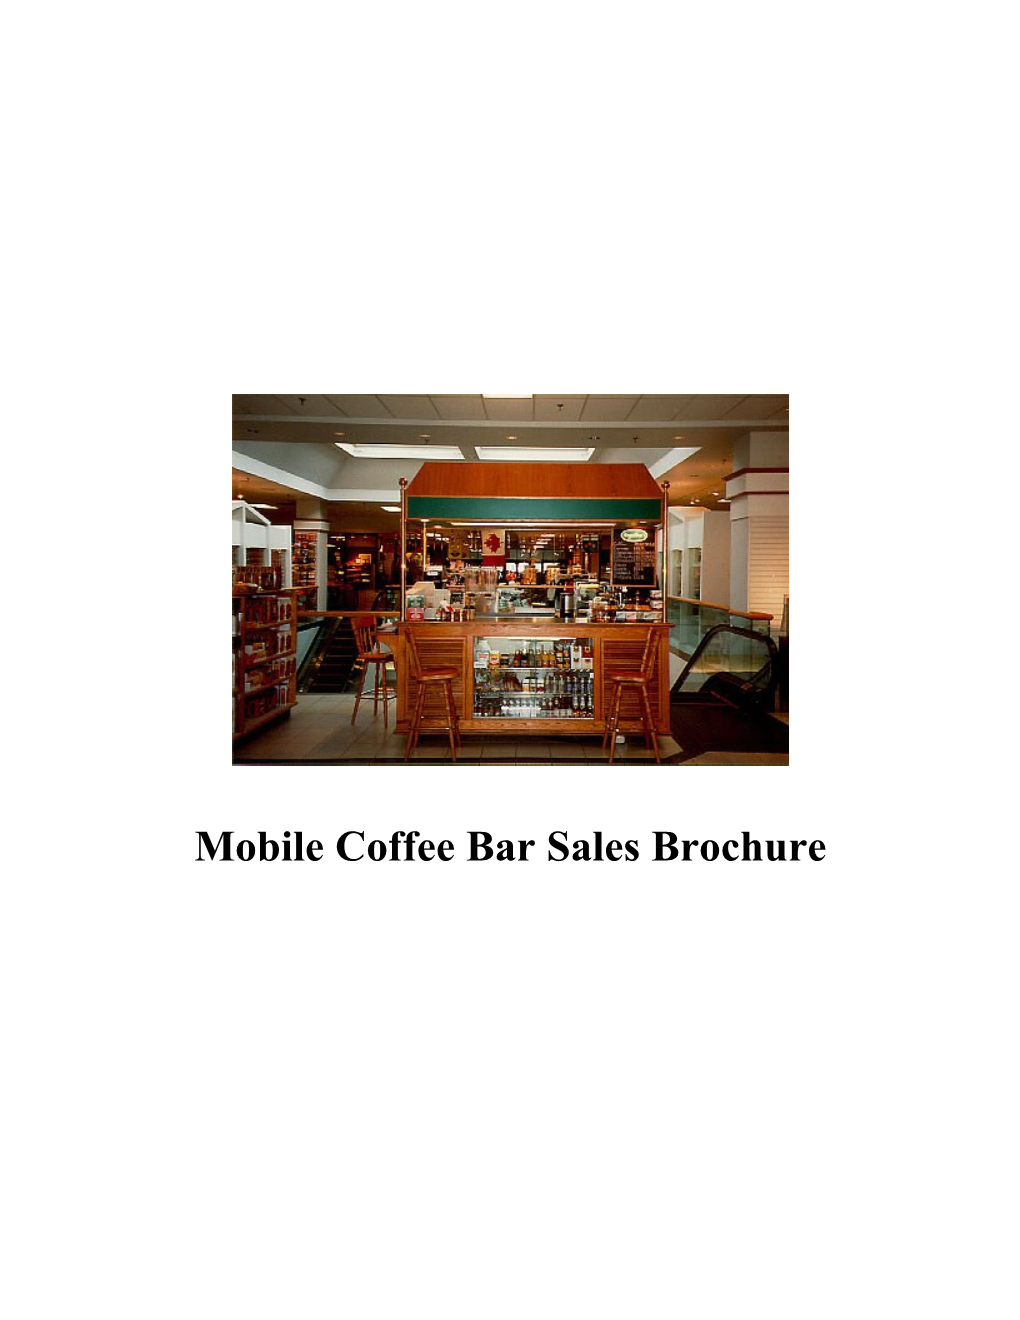 Mobile Coffee Bar Sales Brochure Introduction